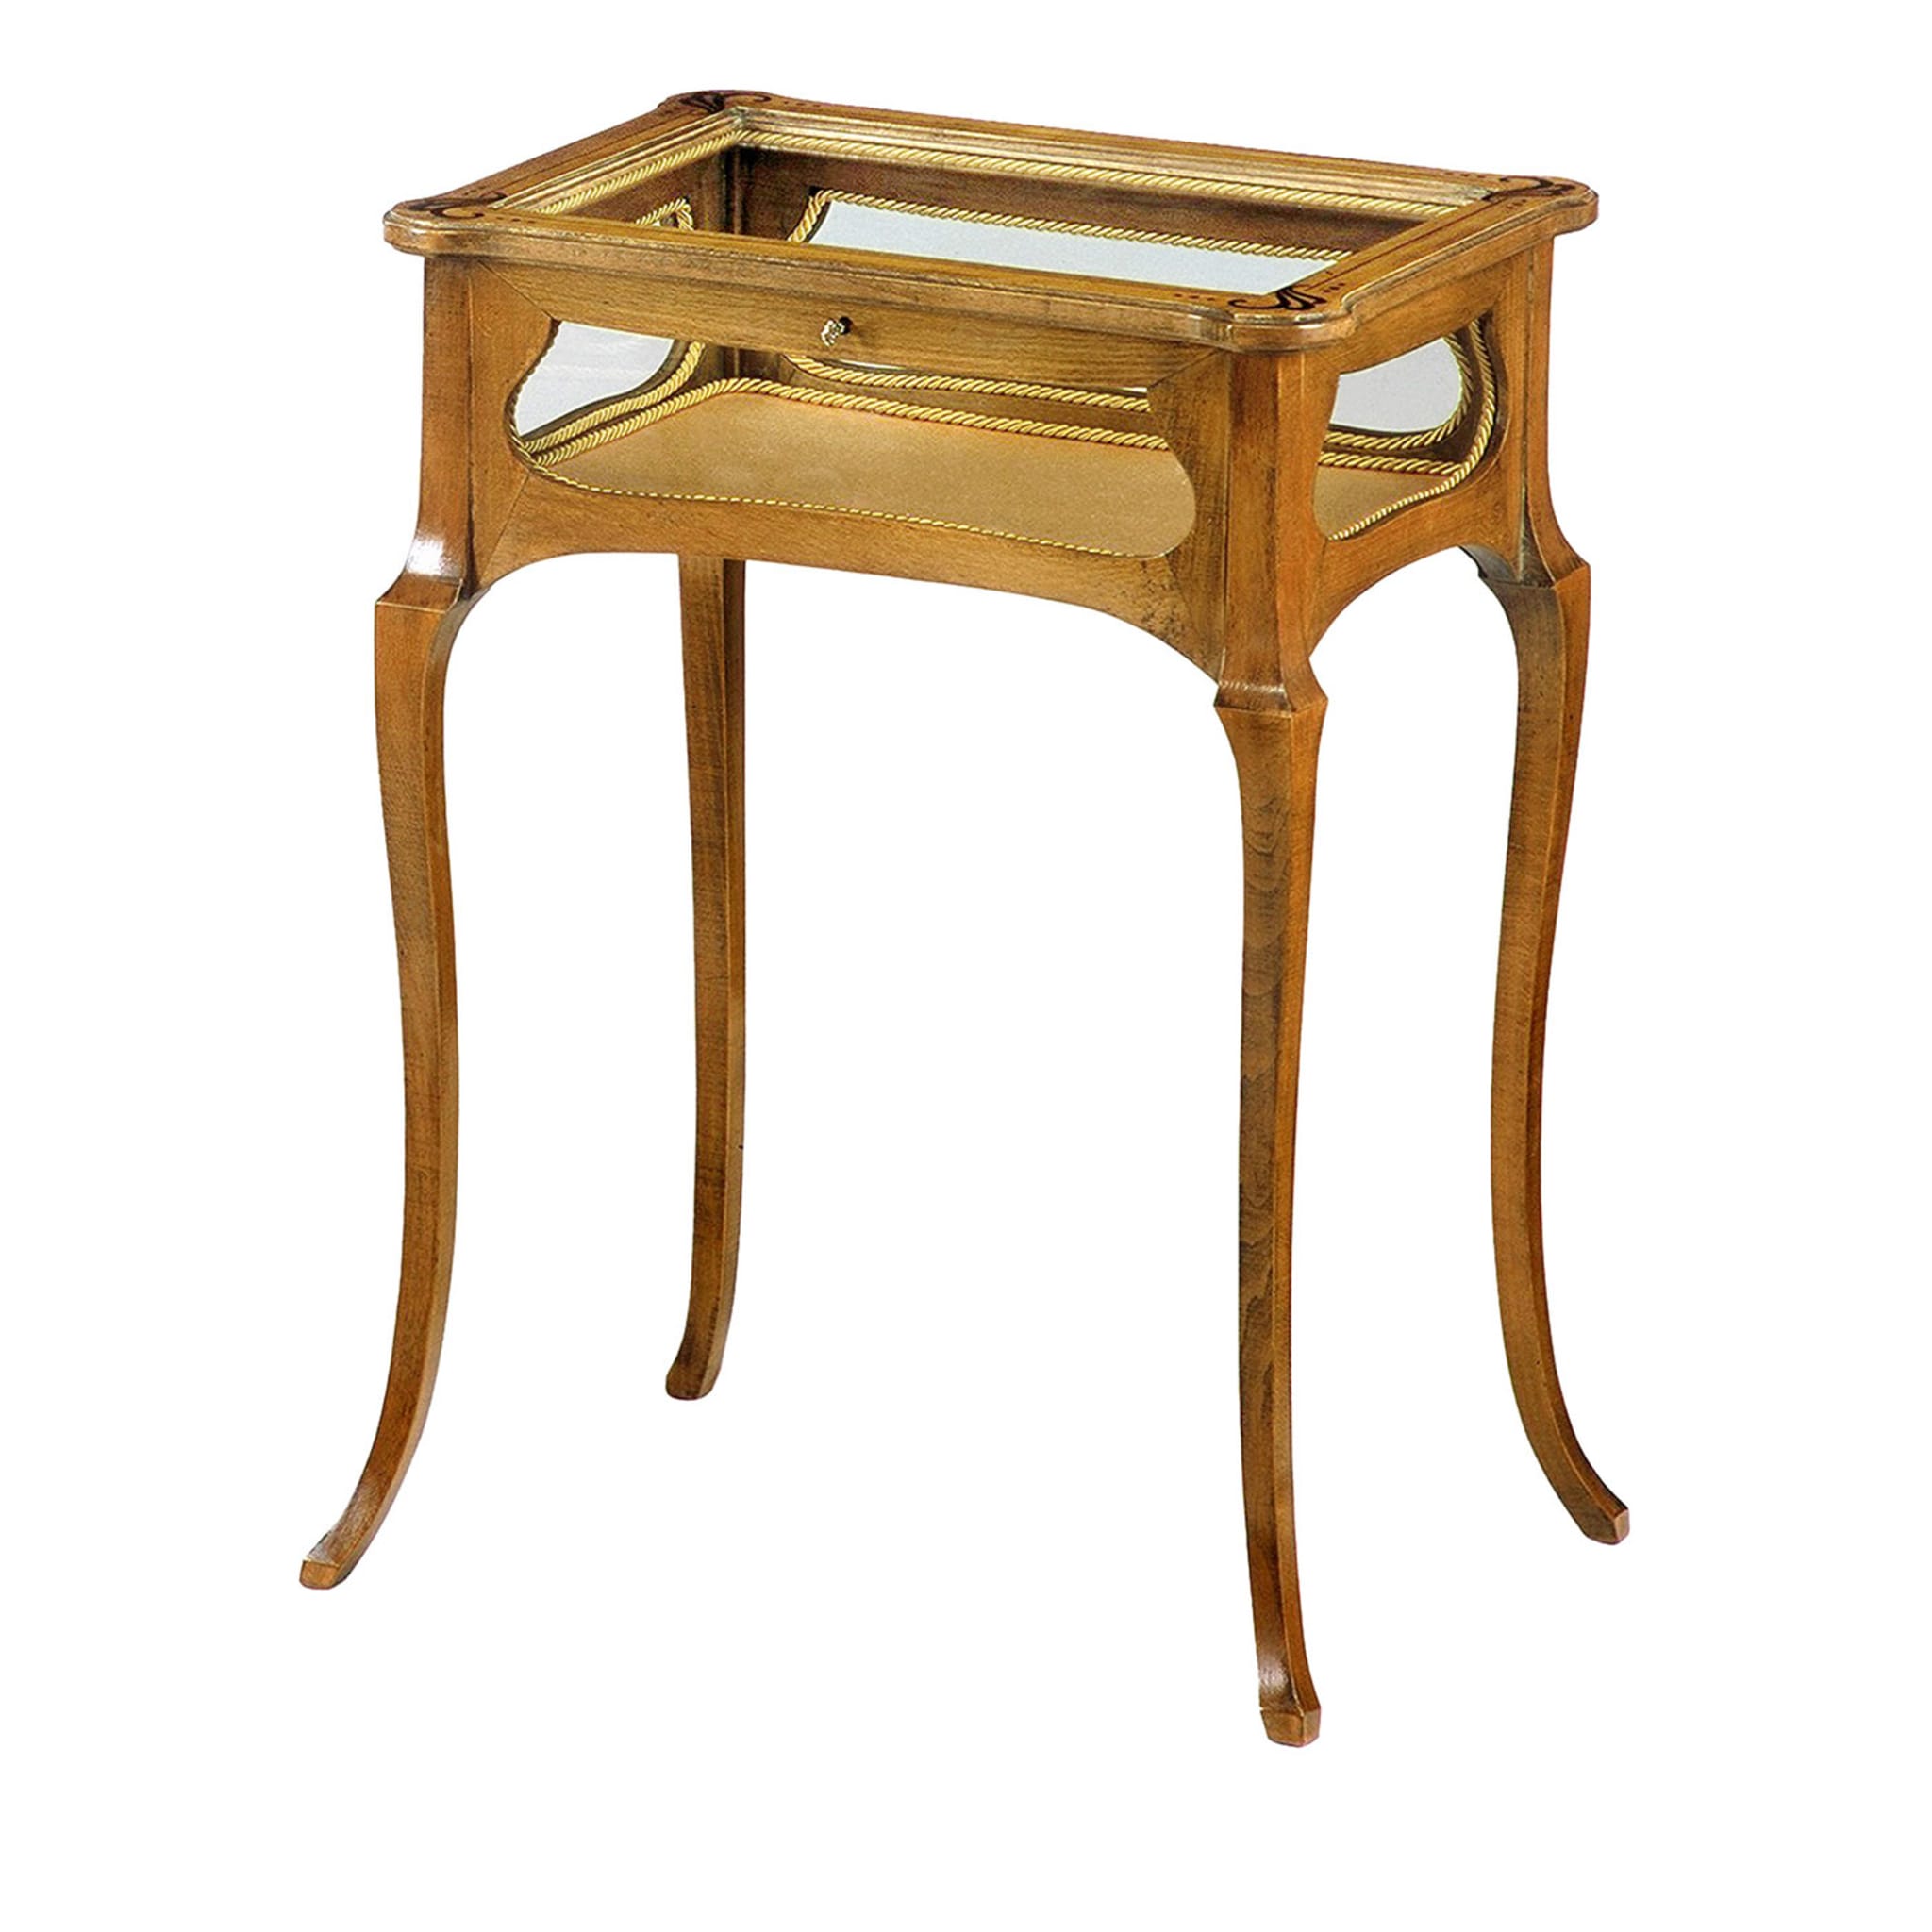 French Art Nouveau-Style Display Side Table - Main view